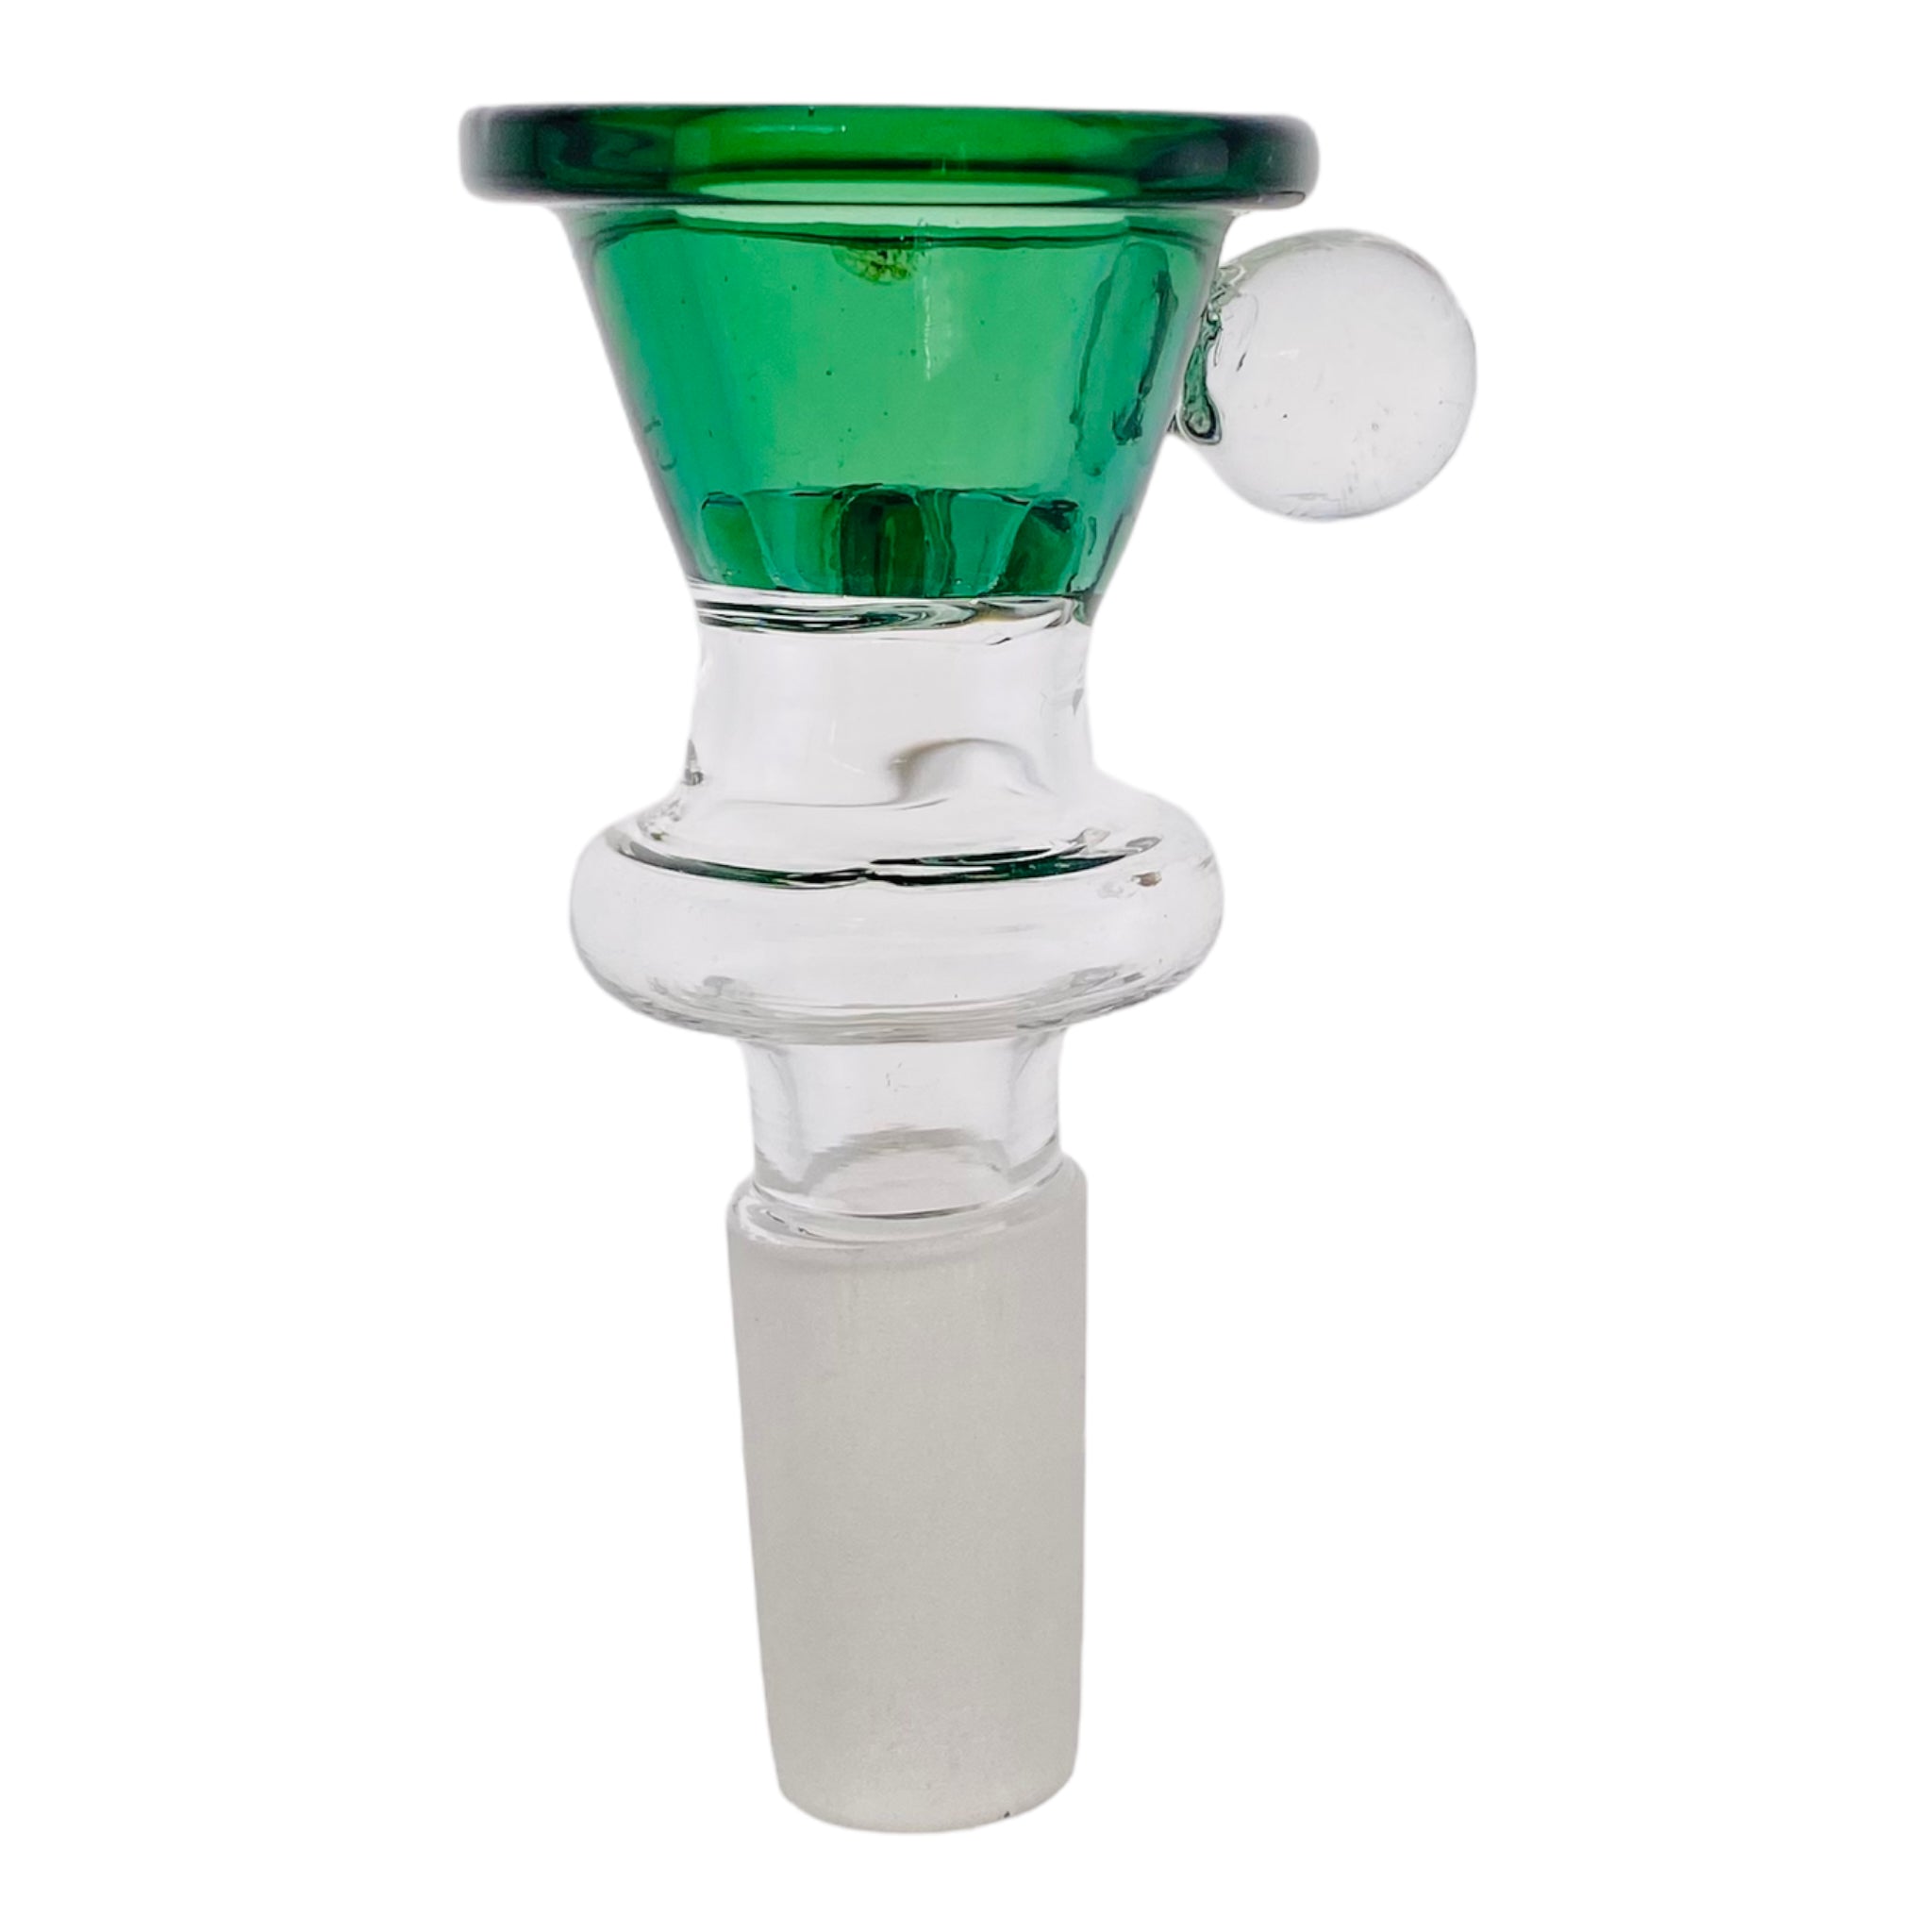 14mm Flower Bowl - Large Martini Funnel Bong Bowl Piece With Built In Screen - Green